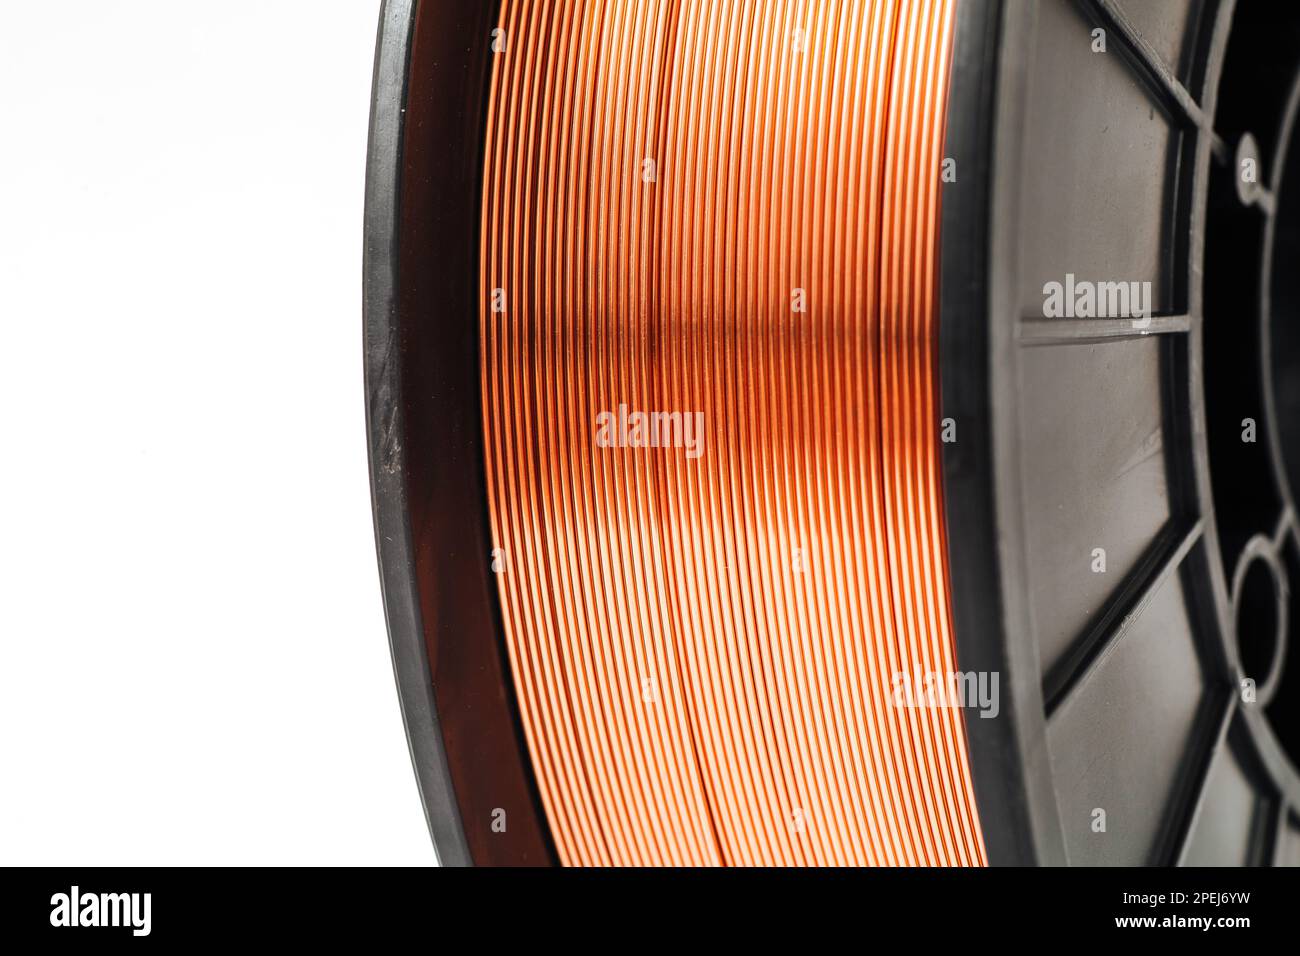 Welding wire spool on a white background. Stock Photo